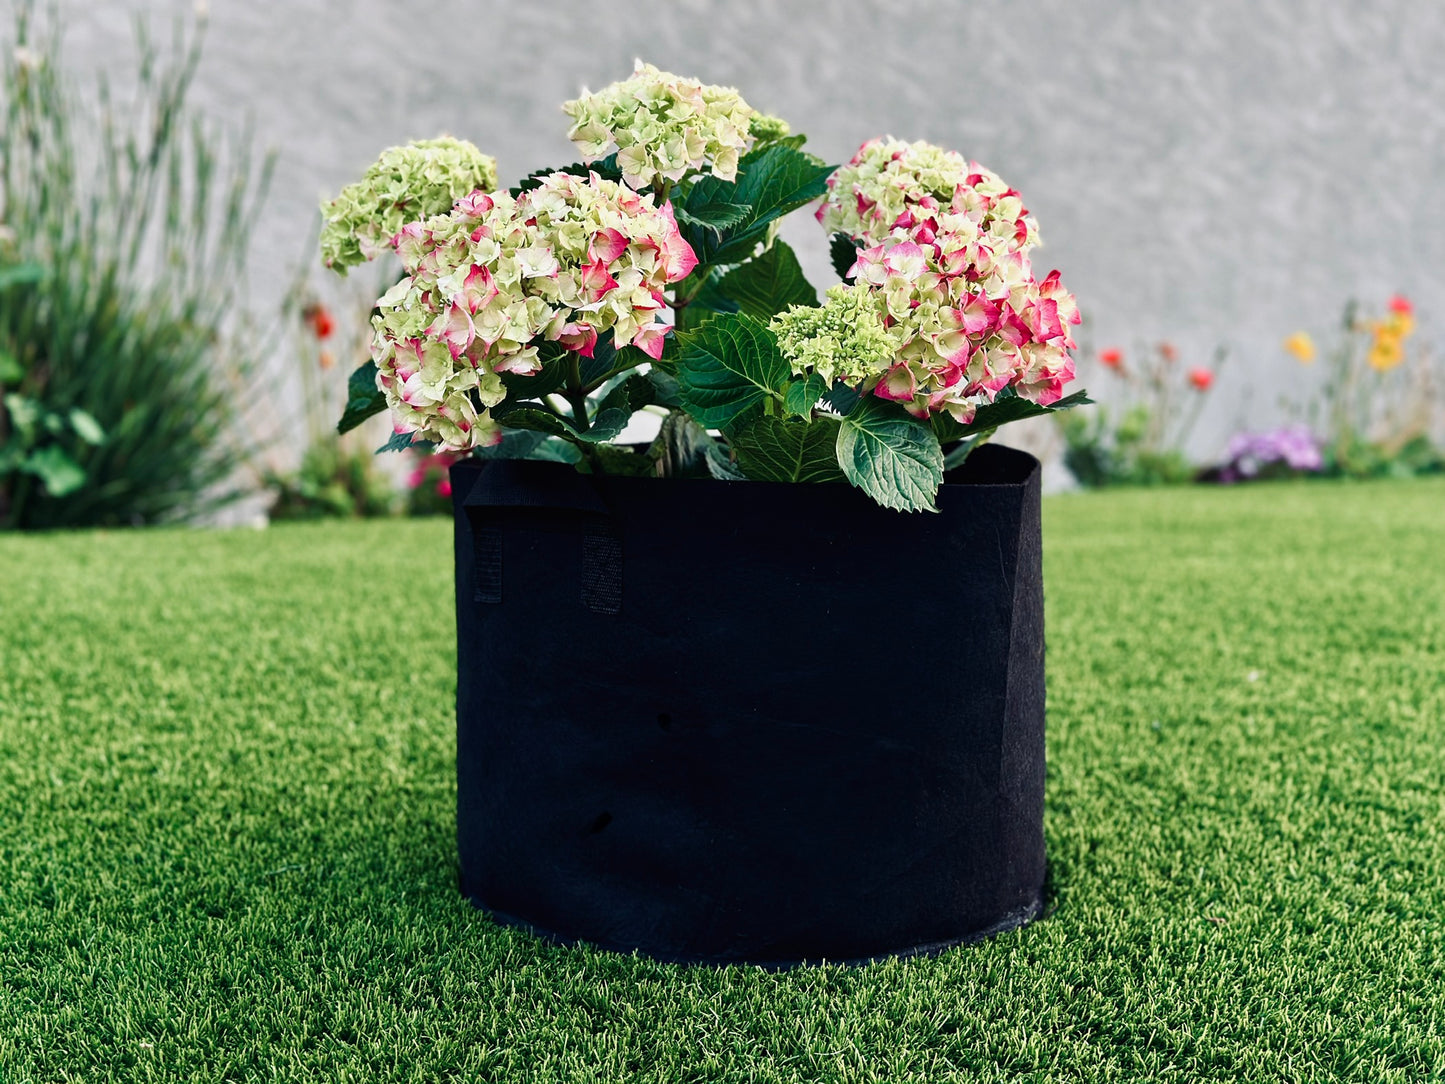 Eco Pack Planter Bag 30 Liters Green HDPE 2 Handles | Inaexport